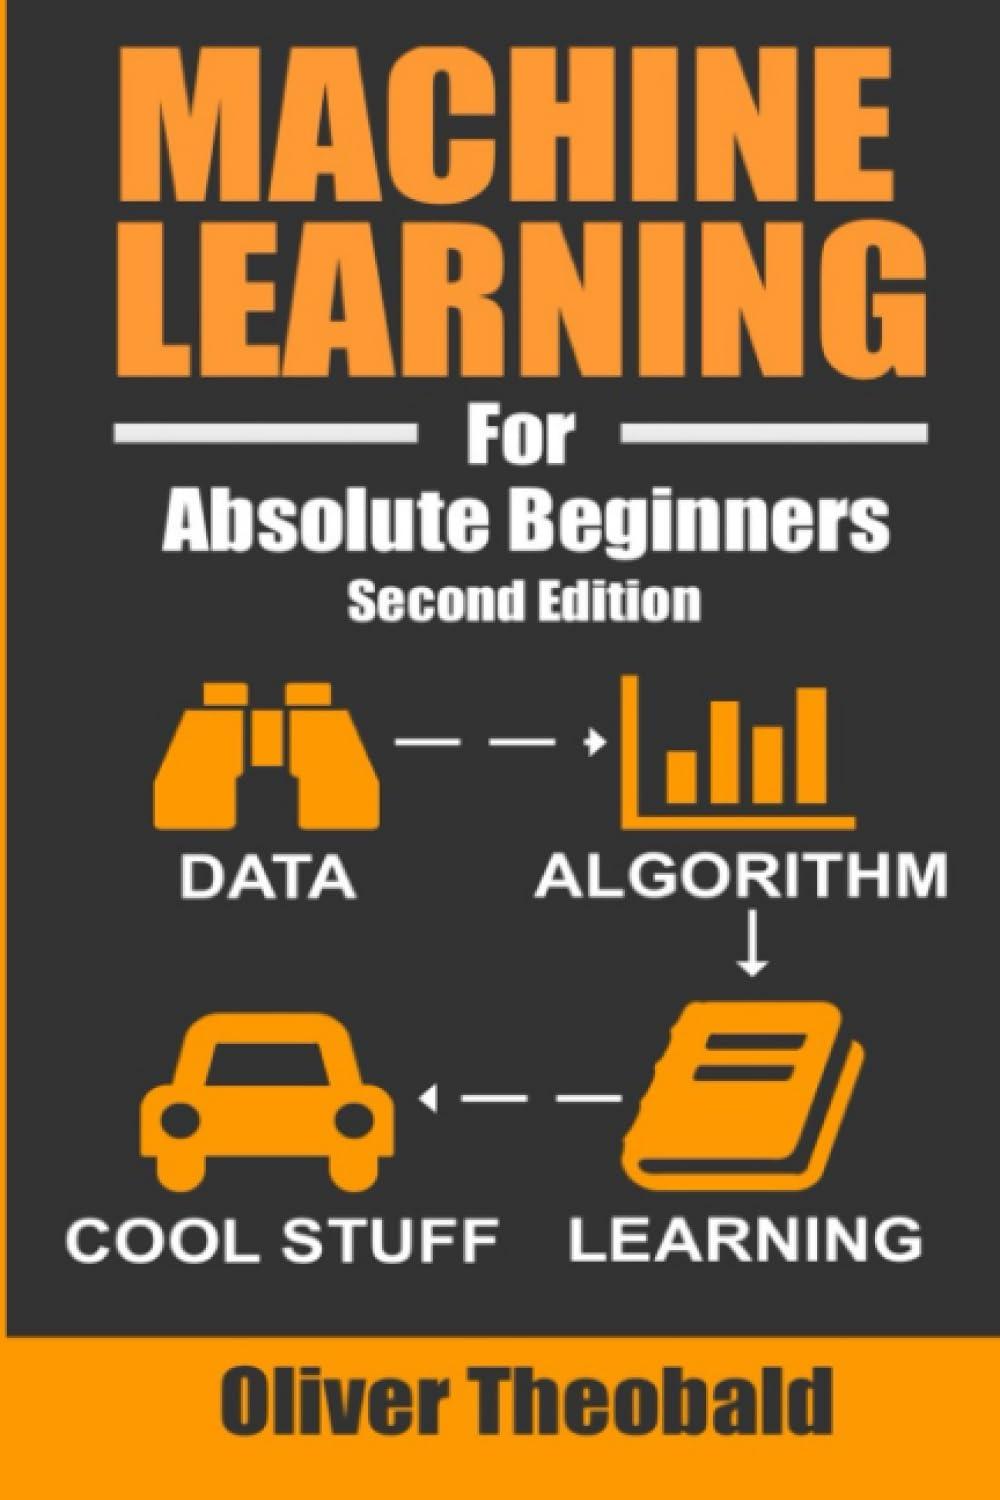 machine learning for absolute beginners 2nd edition oliver theobald 1549617214, 978-1549617218